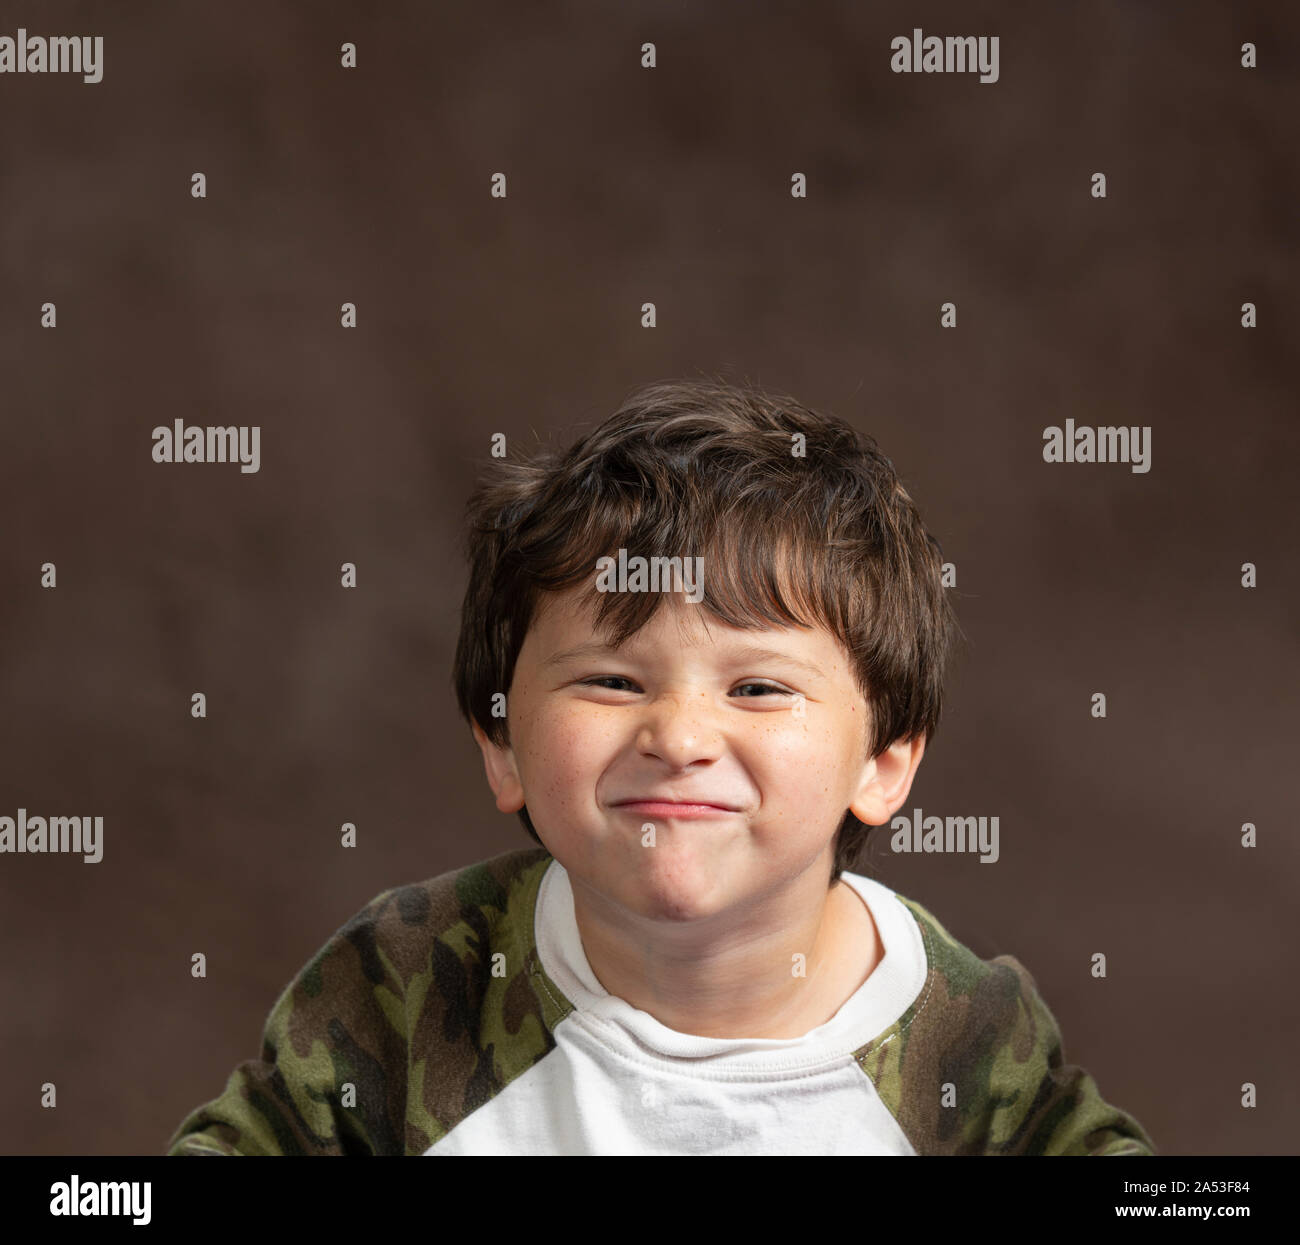 Horizontal studio shot of a little boy making a silly face by scrunching up his face.  Brown background with copy space.  Shot from the chest up. Stock Photo